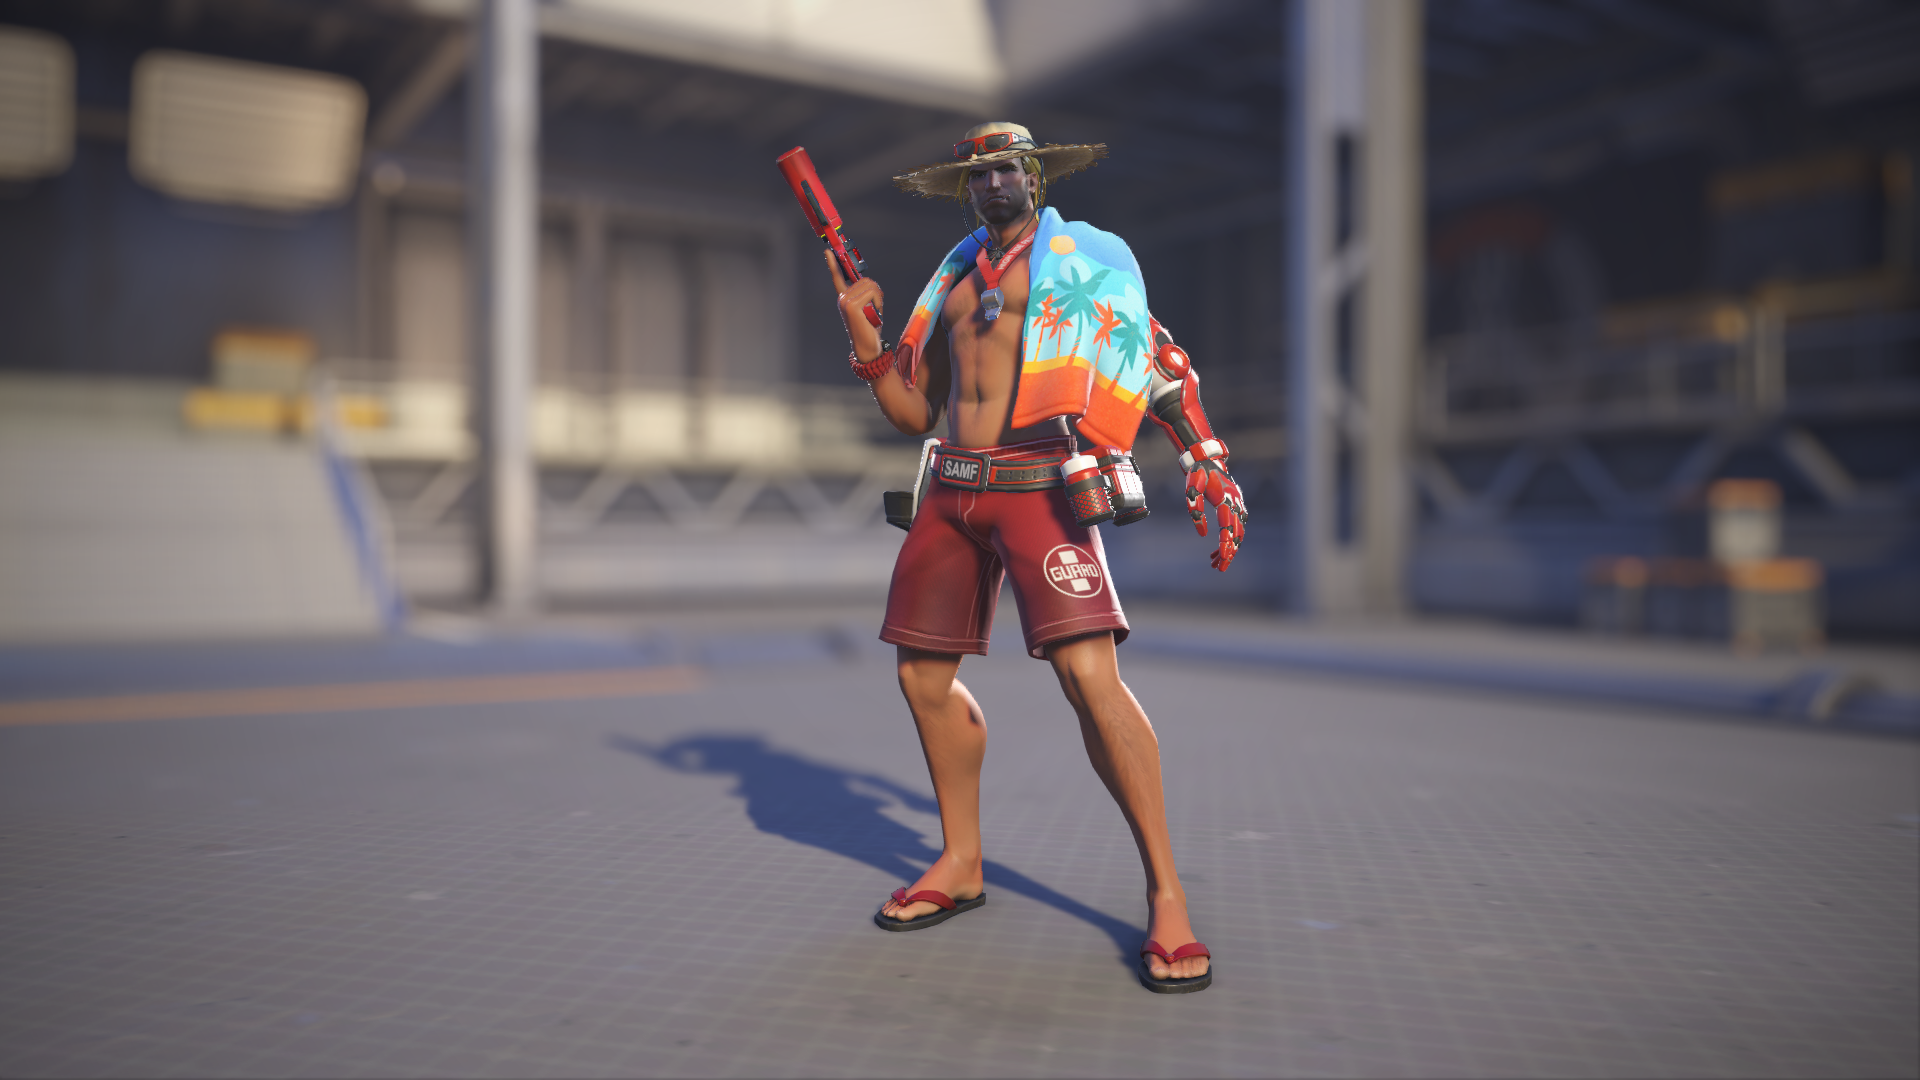 Cassidy models his Lifeguard skin in Overwatch 2.